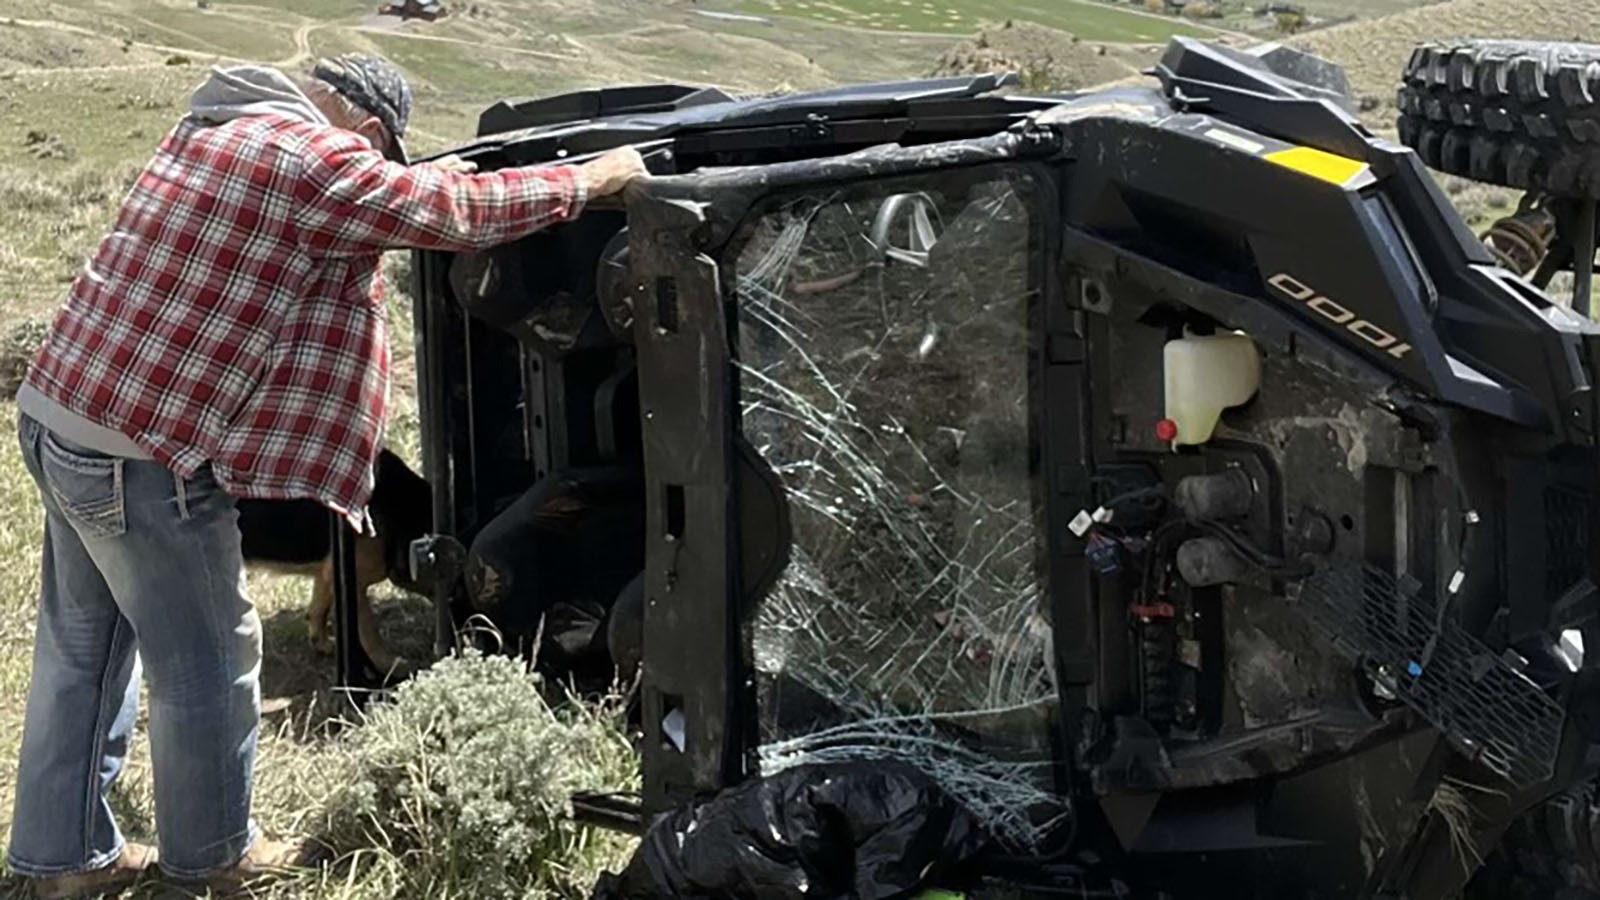 Grant Stambaugh surveys the aftermath of a side-by-side crash on Sheep Mountain in Park County that left his granddaughter’s fiancee horribly injured.